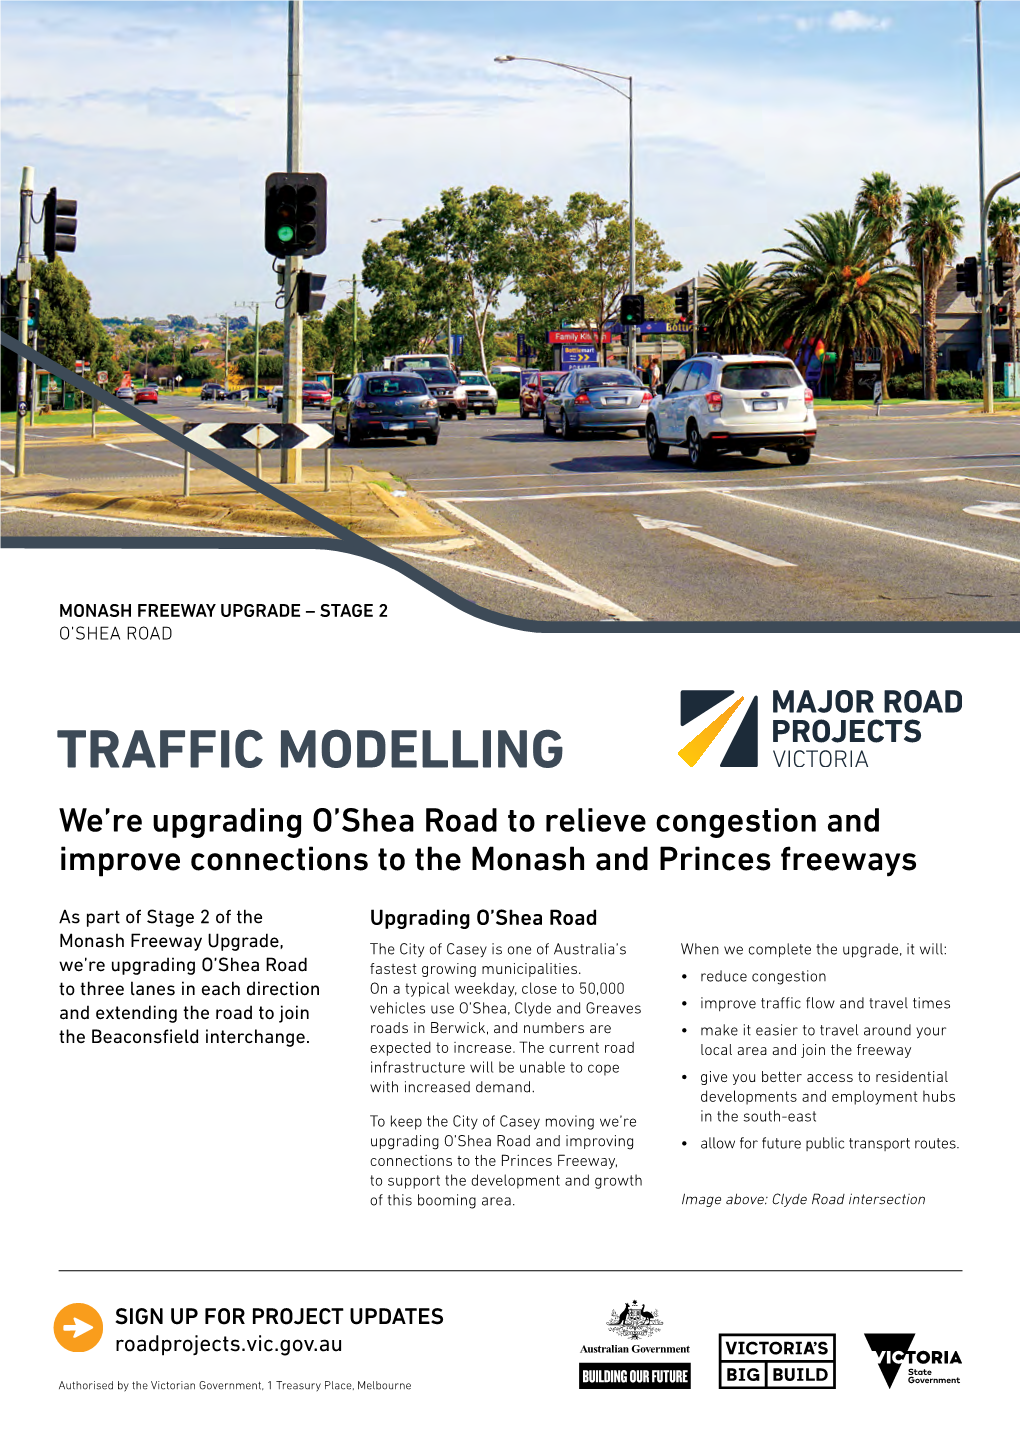 TRAFFIC MODELLING We’Re Upgrading O’Shea Road to Relieve Congestion and Improve Connections to the Monash and Princes Freeways